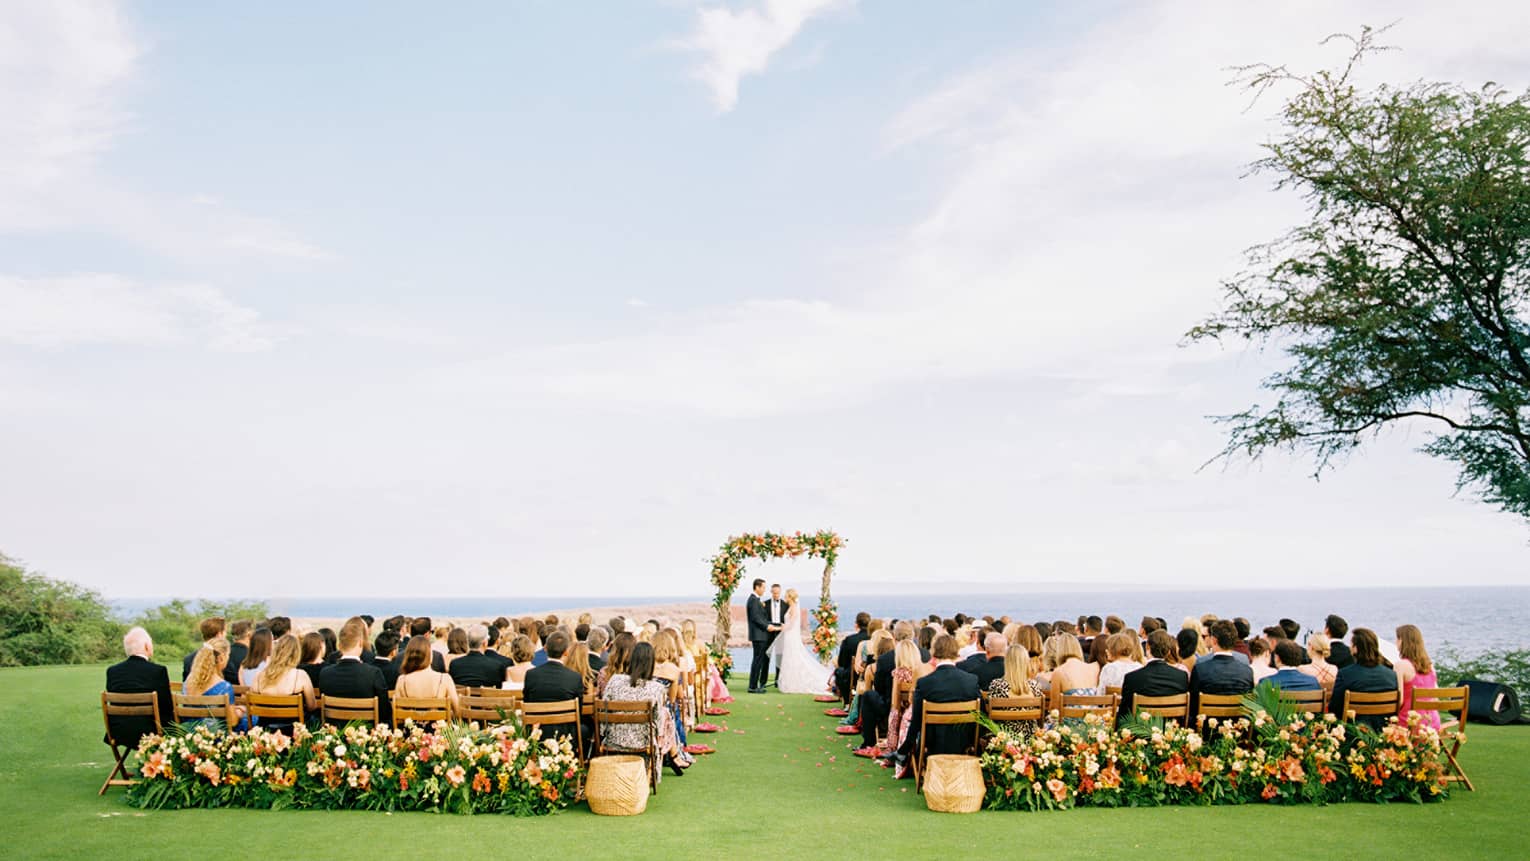 A wedding ceremony outside on a bright day, the bridge and groom are under a flower arch and many people are seated watching.